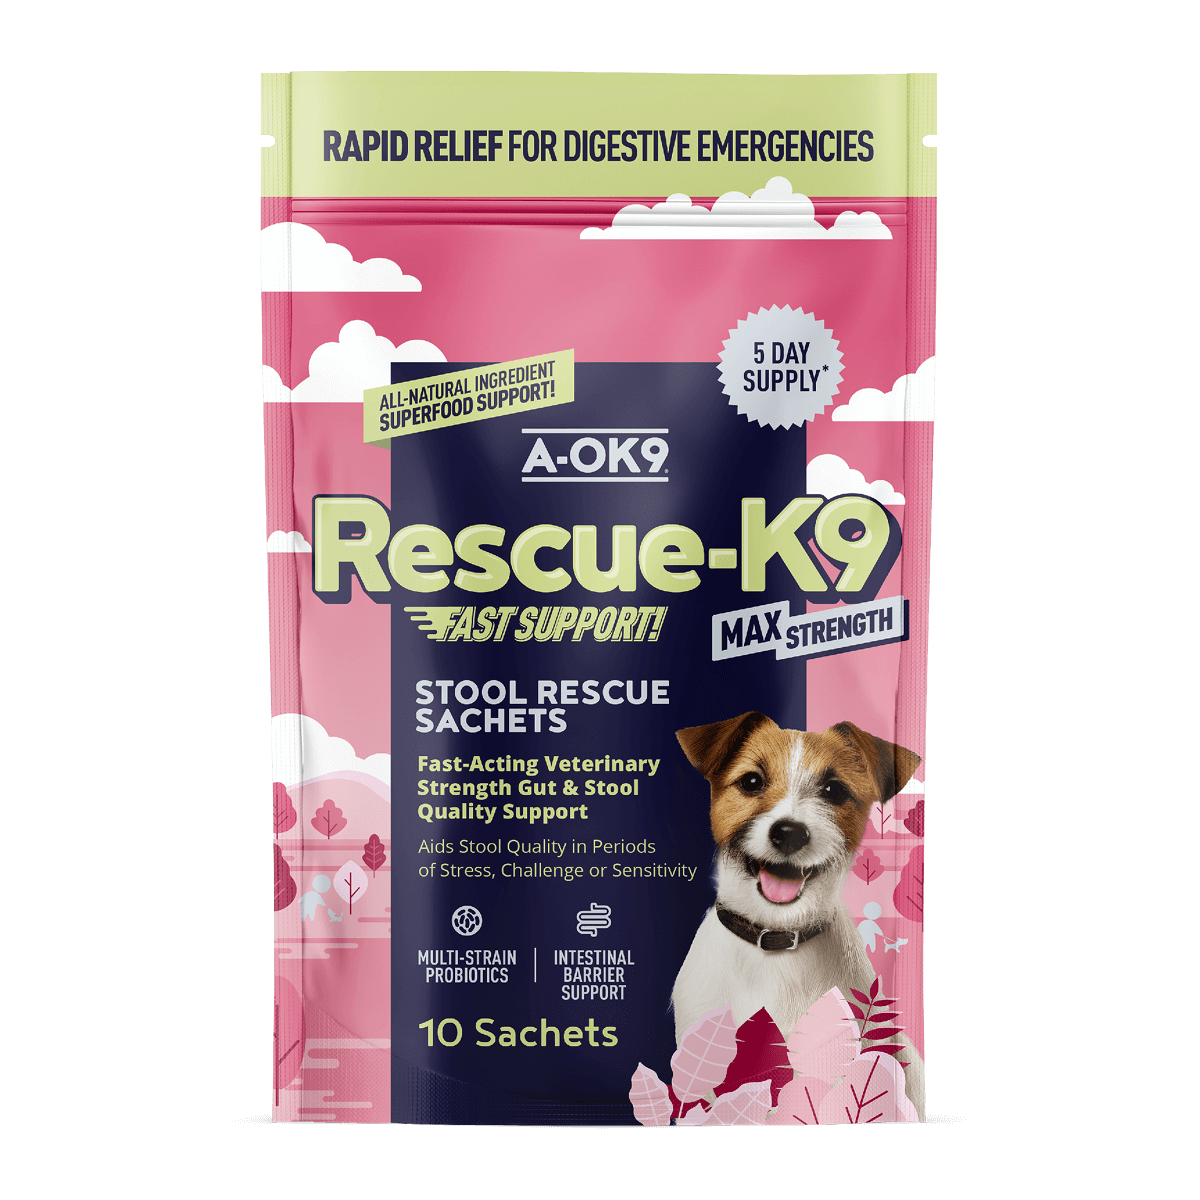 Rescue-K9: Pack of 10 Sachets [Extra Pack with 30% off!]